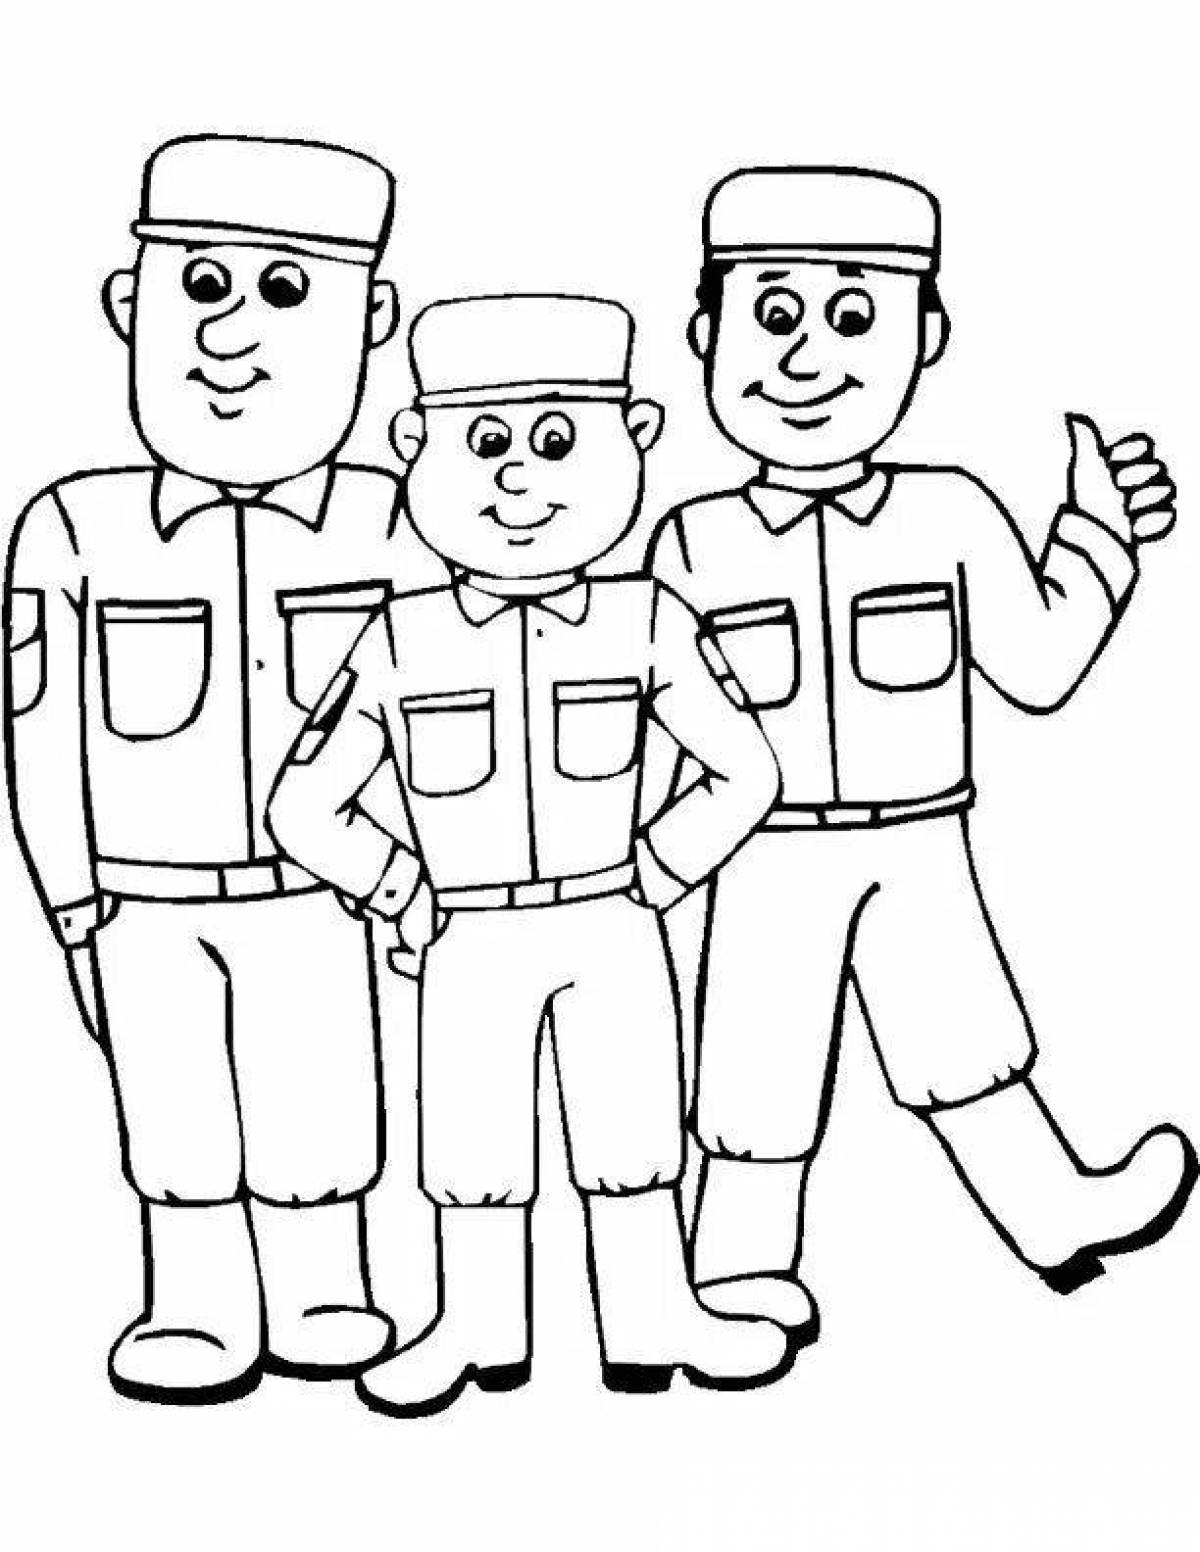 Awesome demobilization coloring page